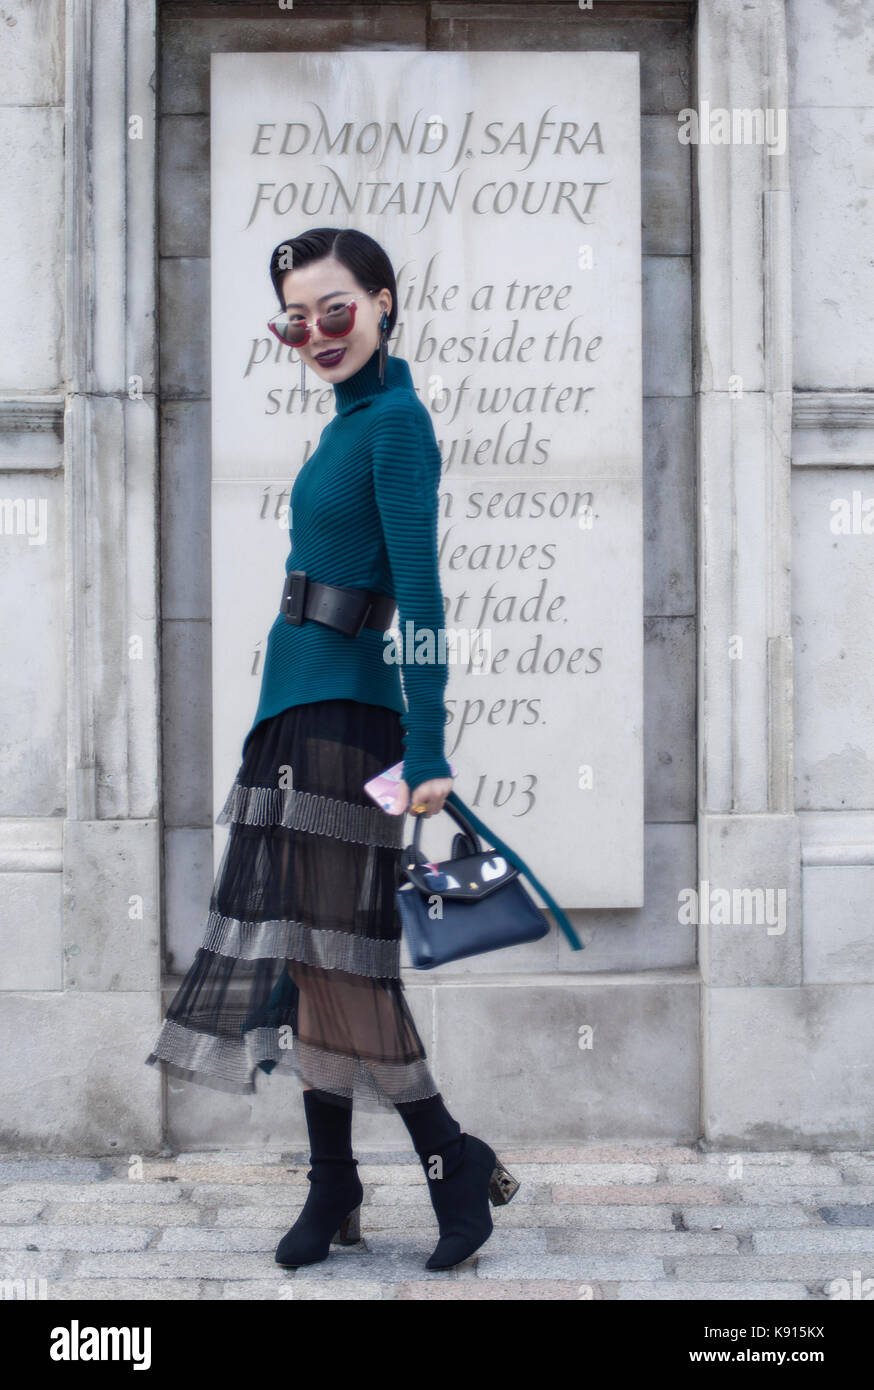 Image shows Harper from China. She wear glasses from Miu Miu, earrings by  Shallow Minx, a Stu Studio top with a belt from Zara, a dress by Carine Wu  with shoes from